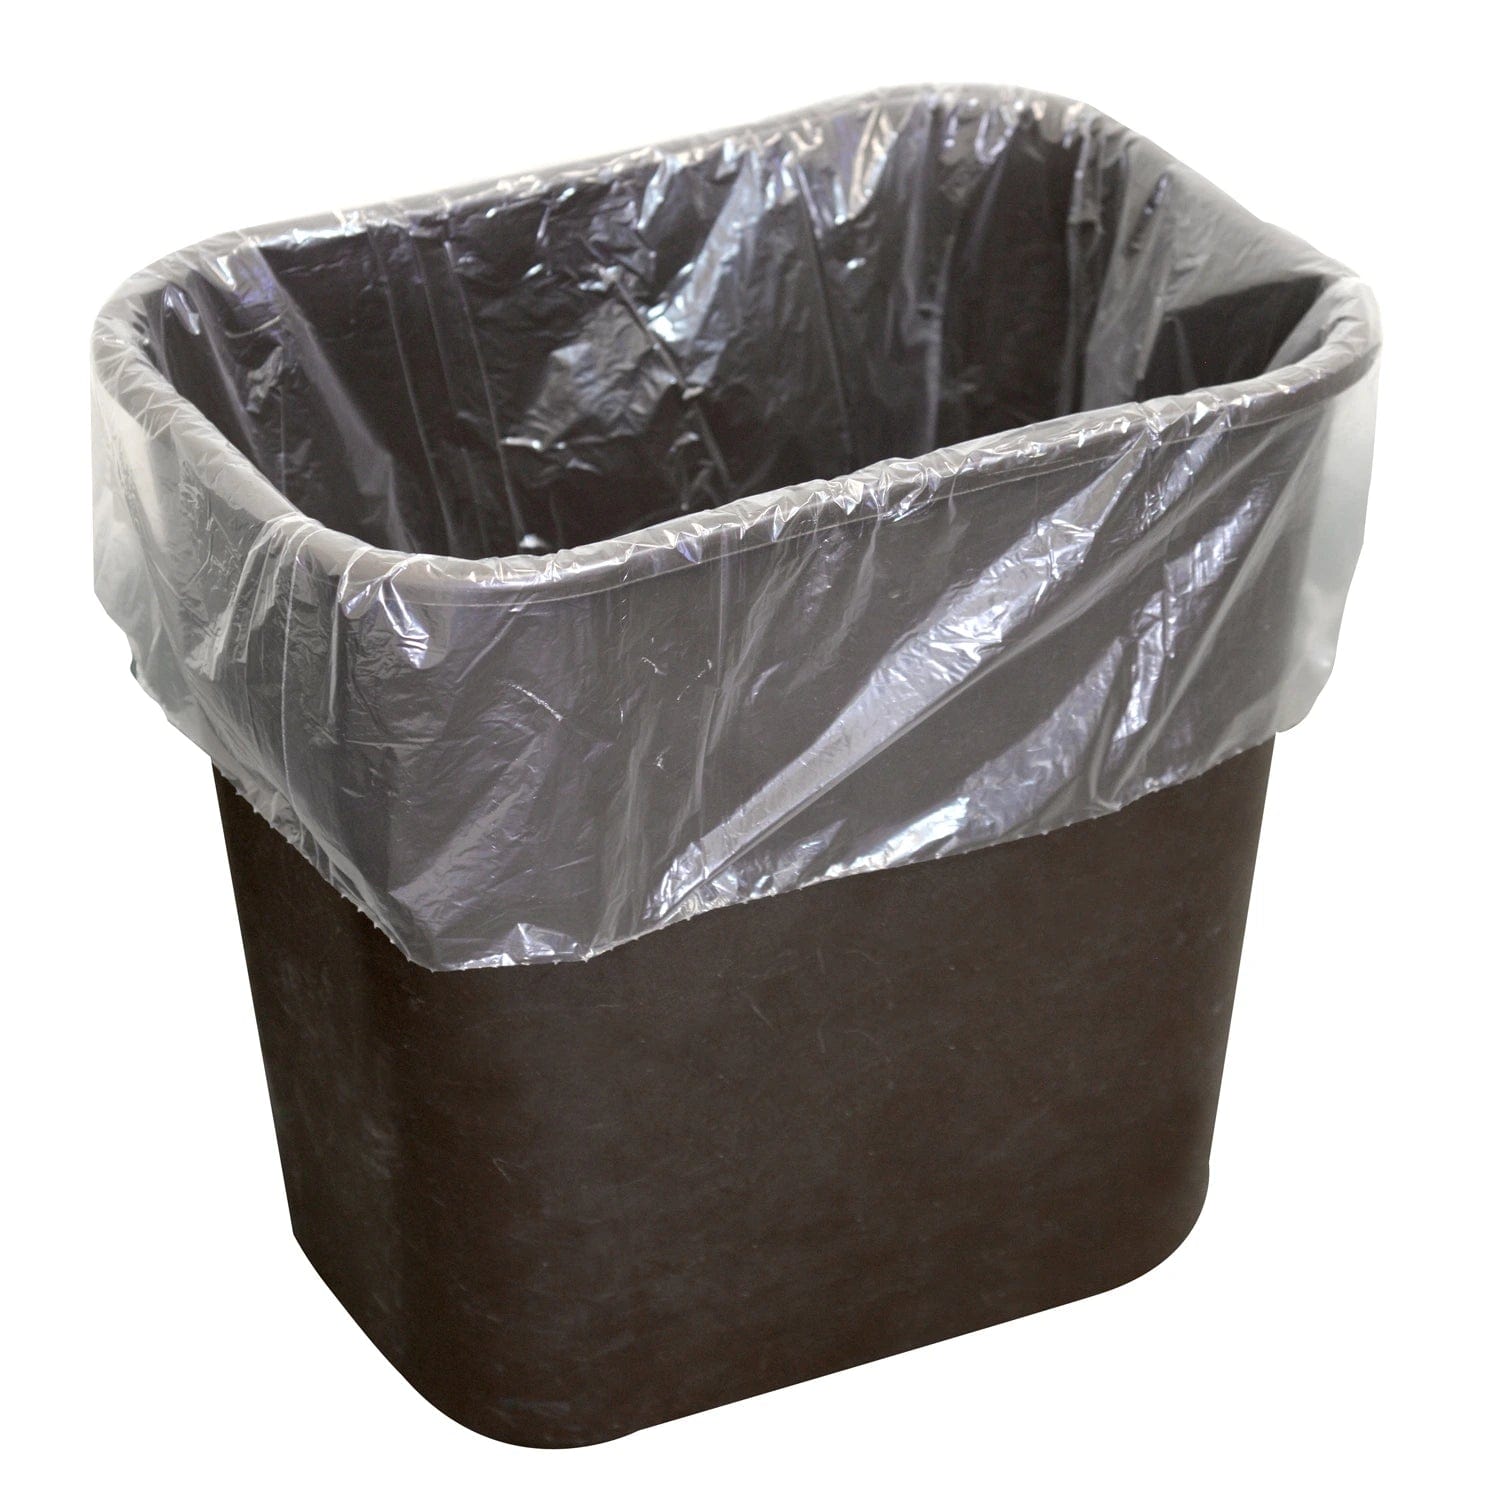 Commercial trash bags 15 gallon 23x33 8 mic case of 1000